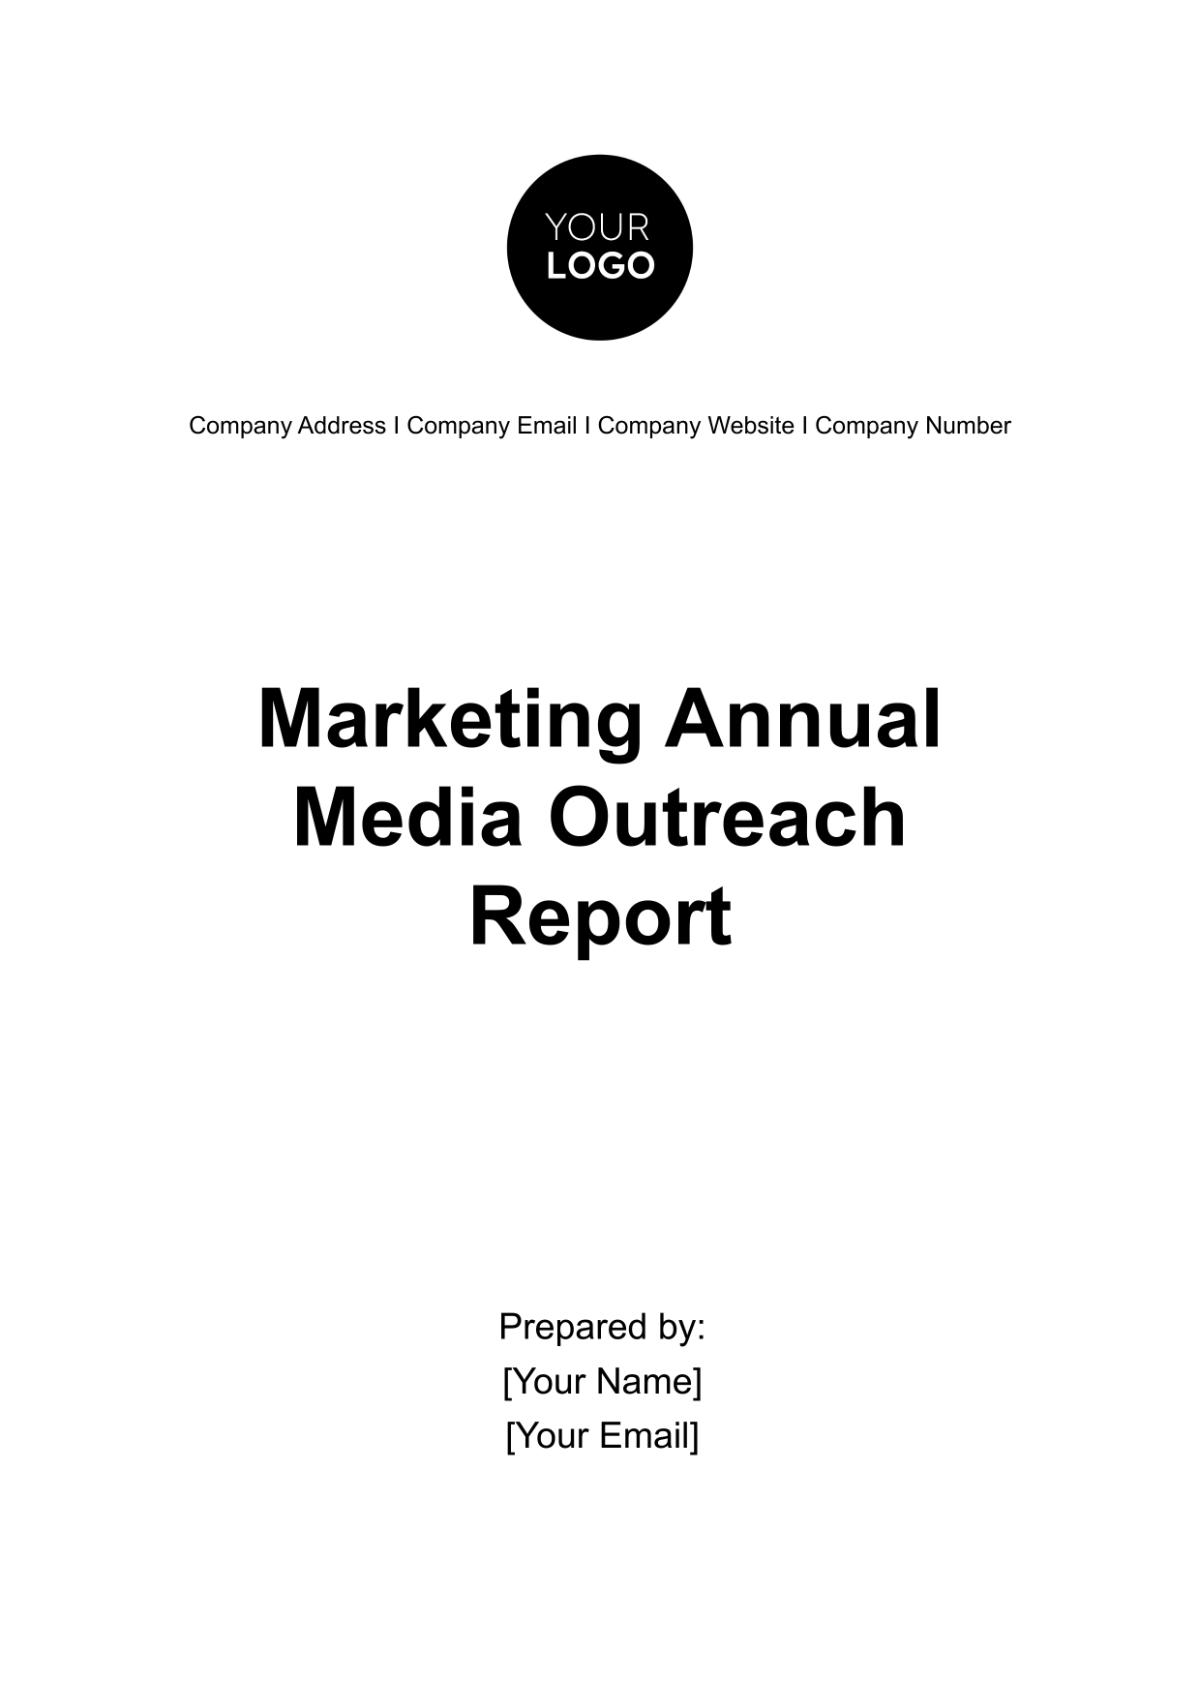 Free Marketing Annual Media Outreach Report Template